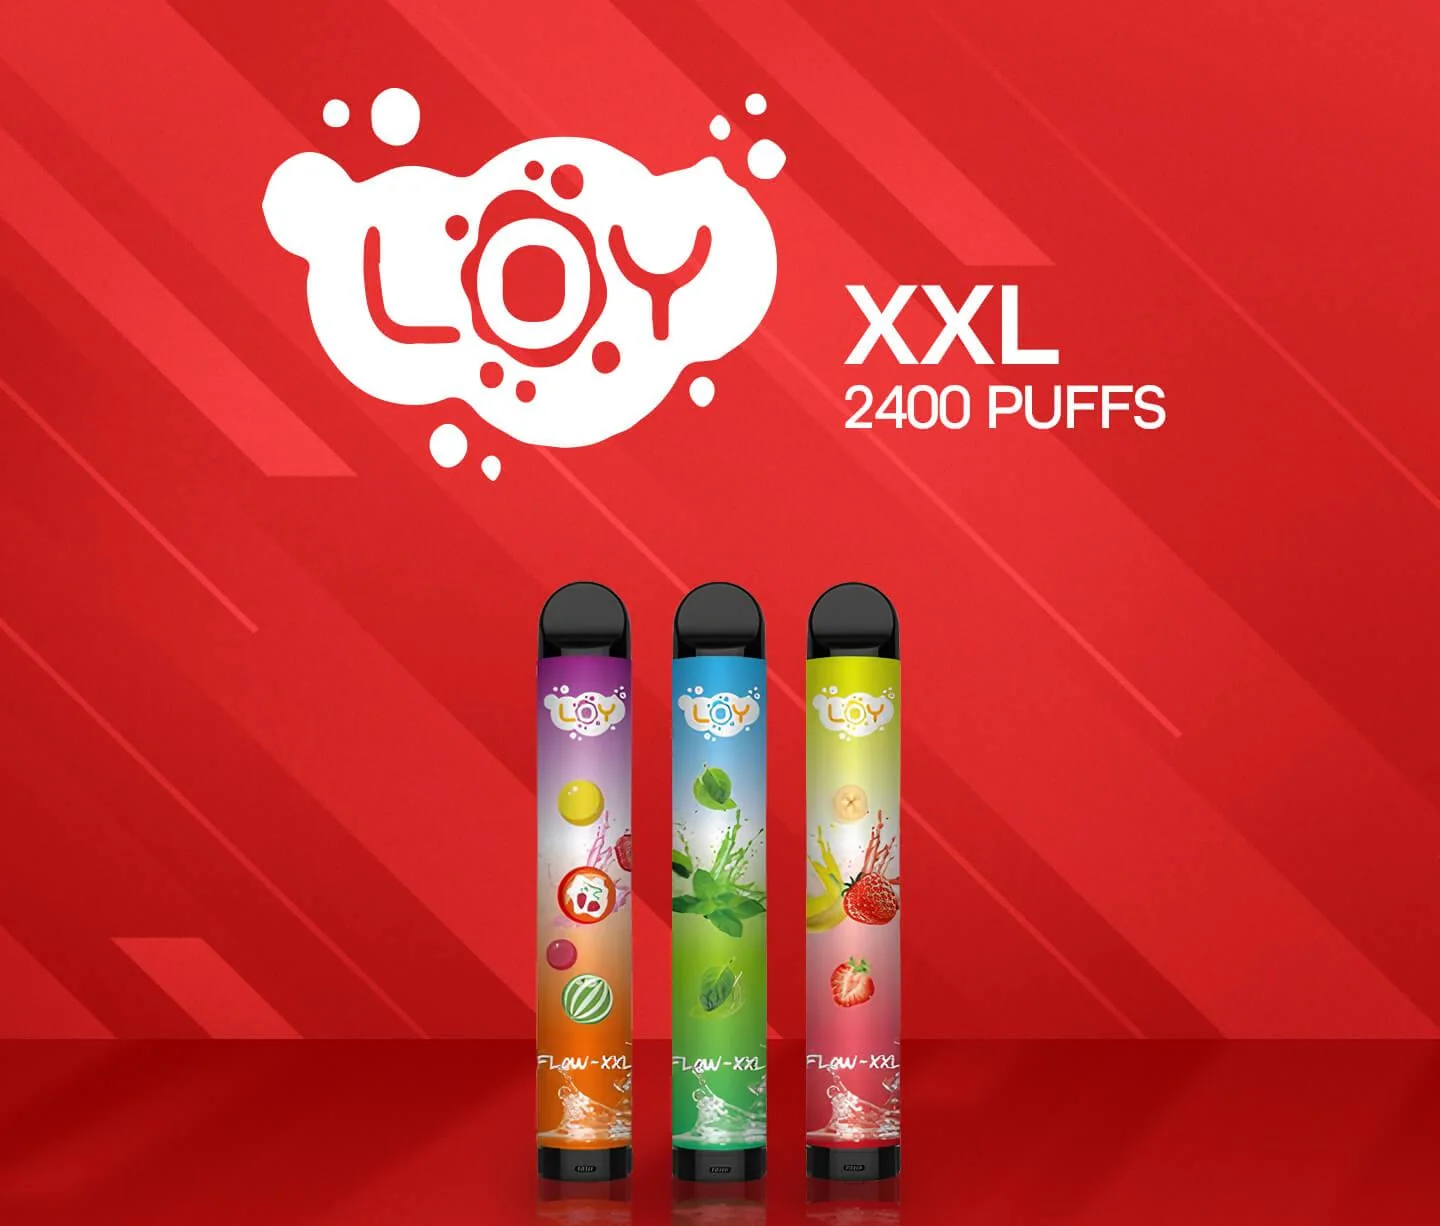 Loy XXL Flow: Vaping Reinvented with 2400 Puffs